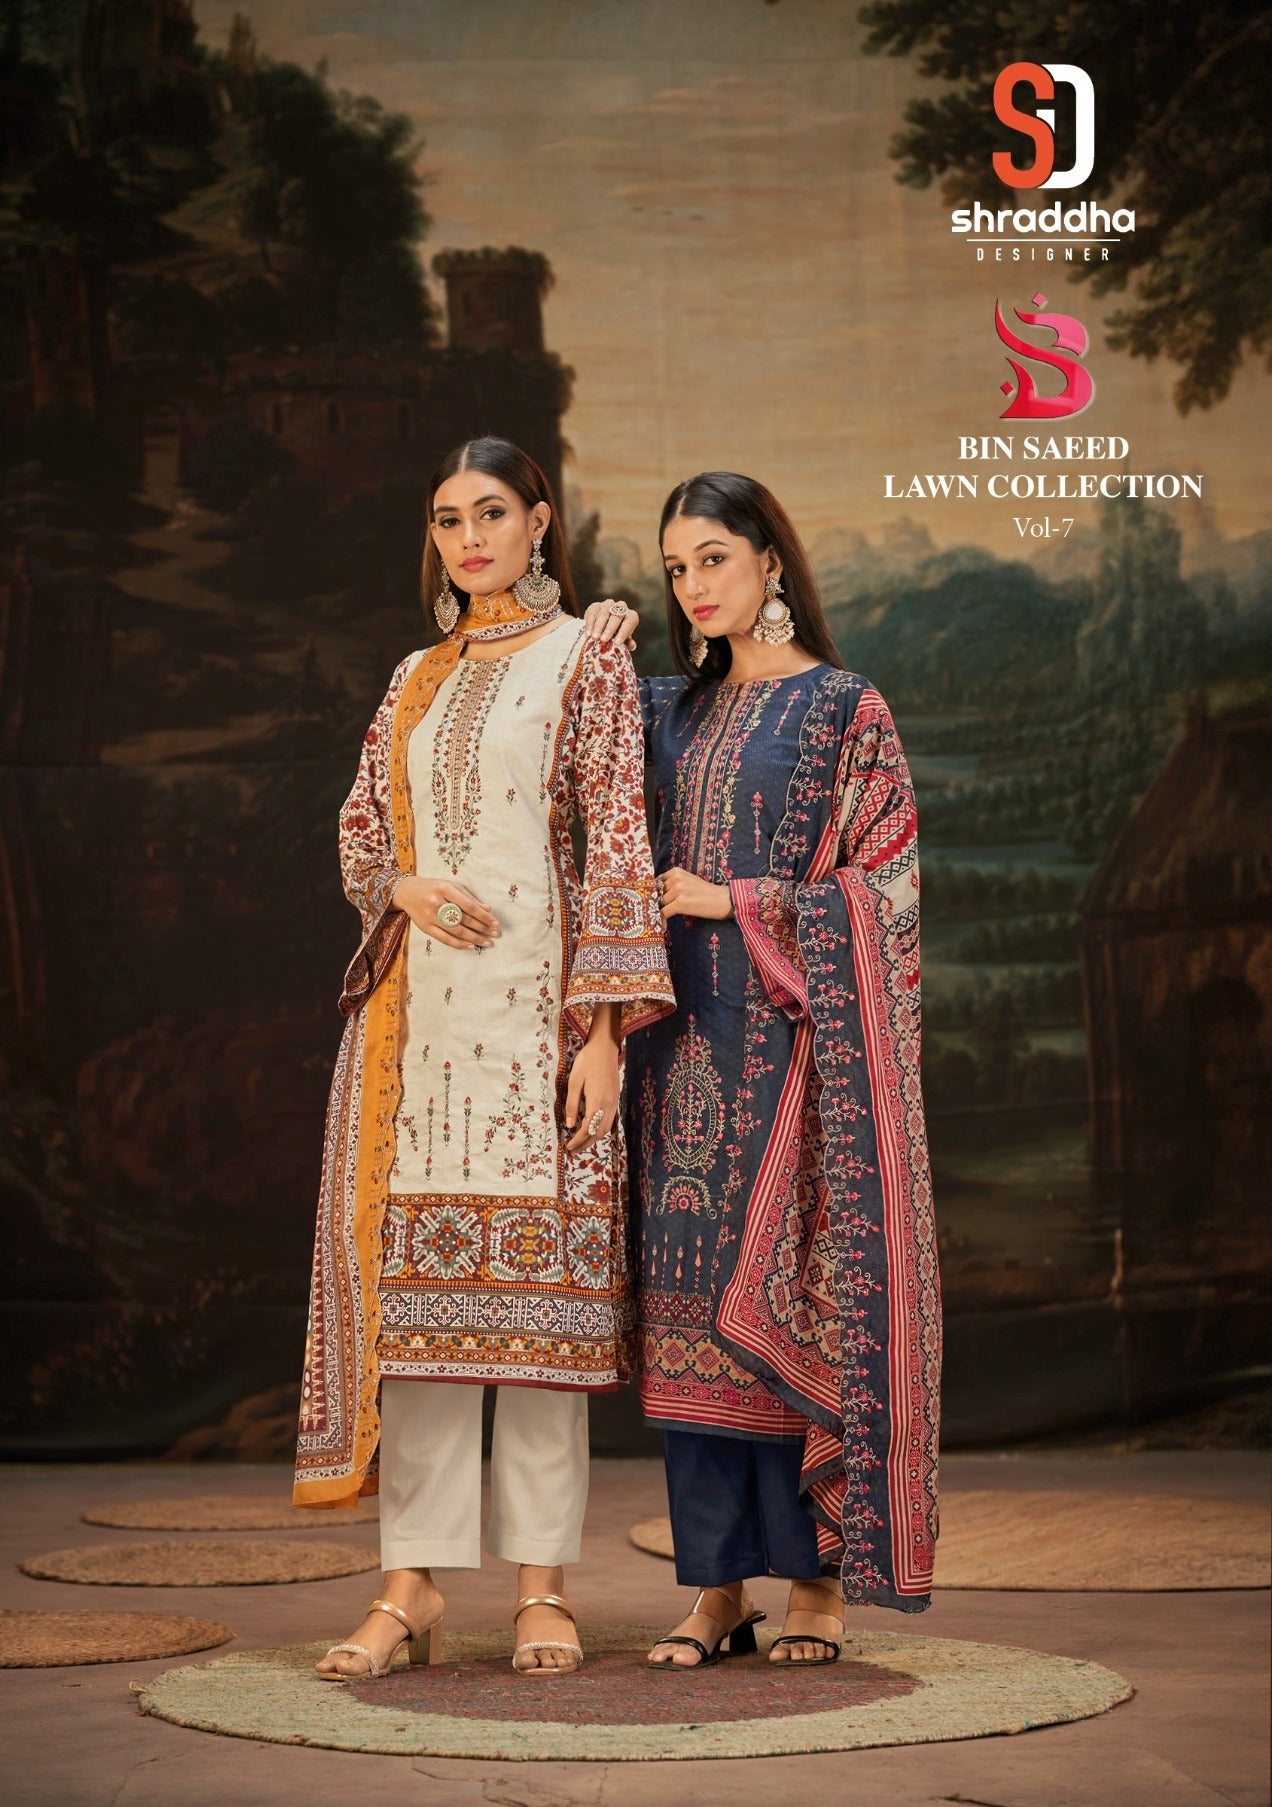 Sharddha Designer Bin Saeed Lawn Collection Vol 7 Cotton With Embroidery Work Salwar Suits Wholesale Supplier